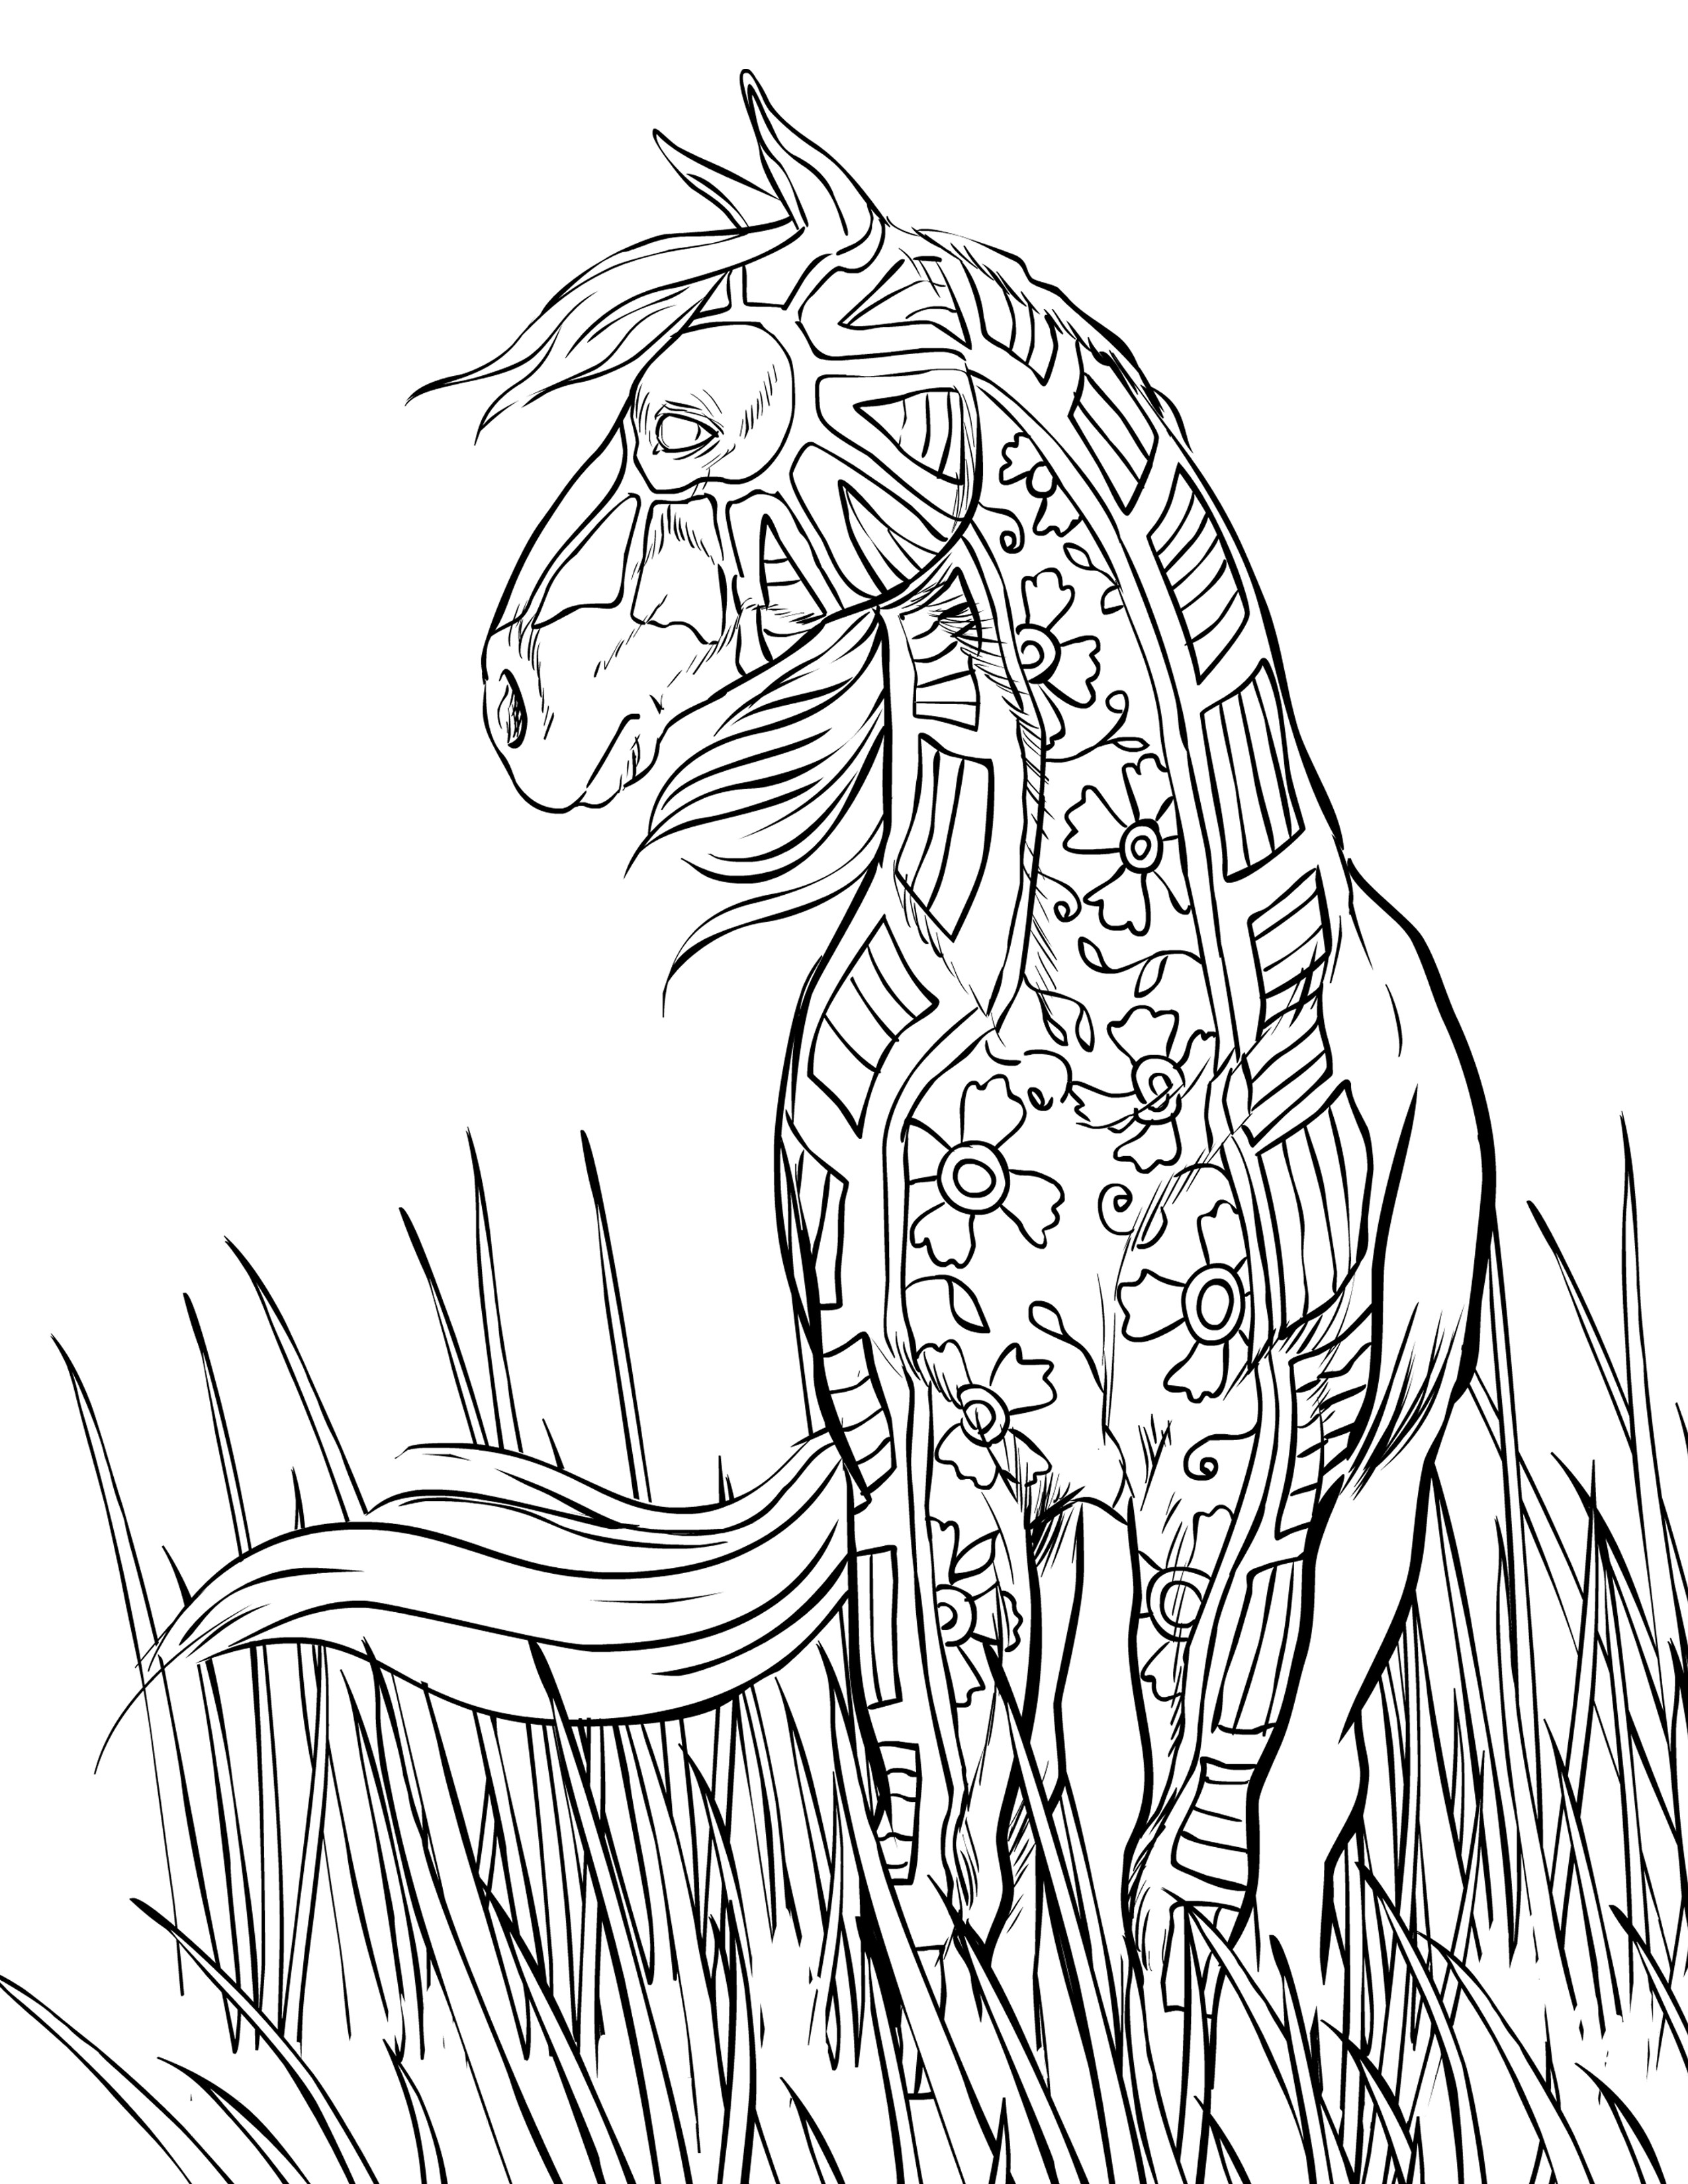 Horse Coloring Pages For Adults
 FREE HORSE COLORING PAGES